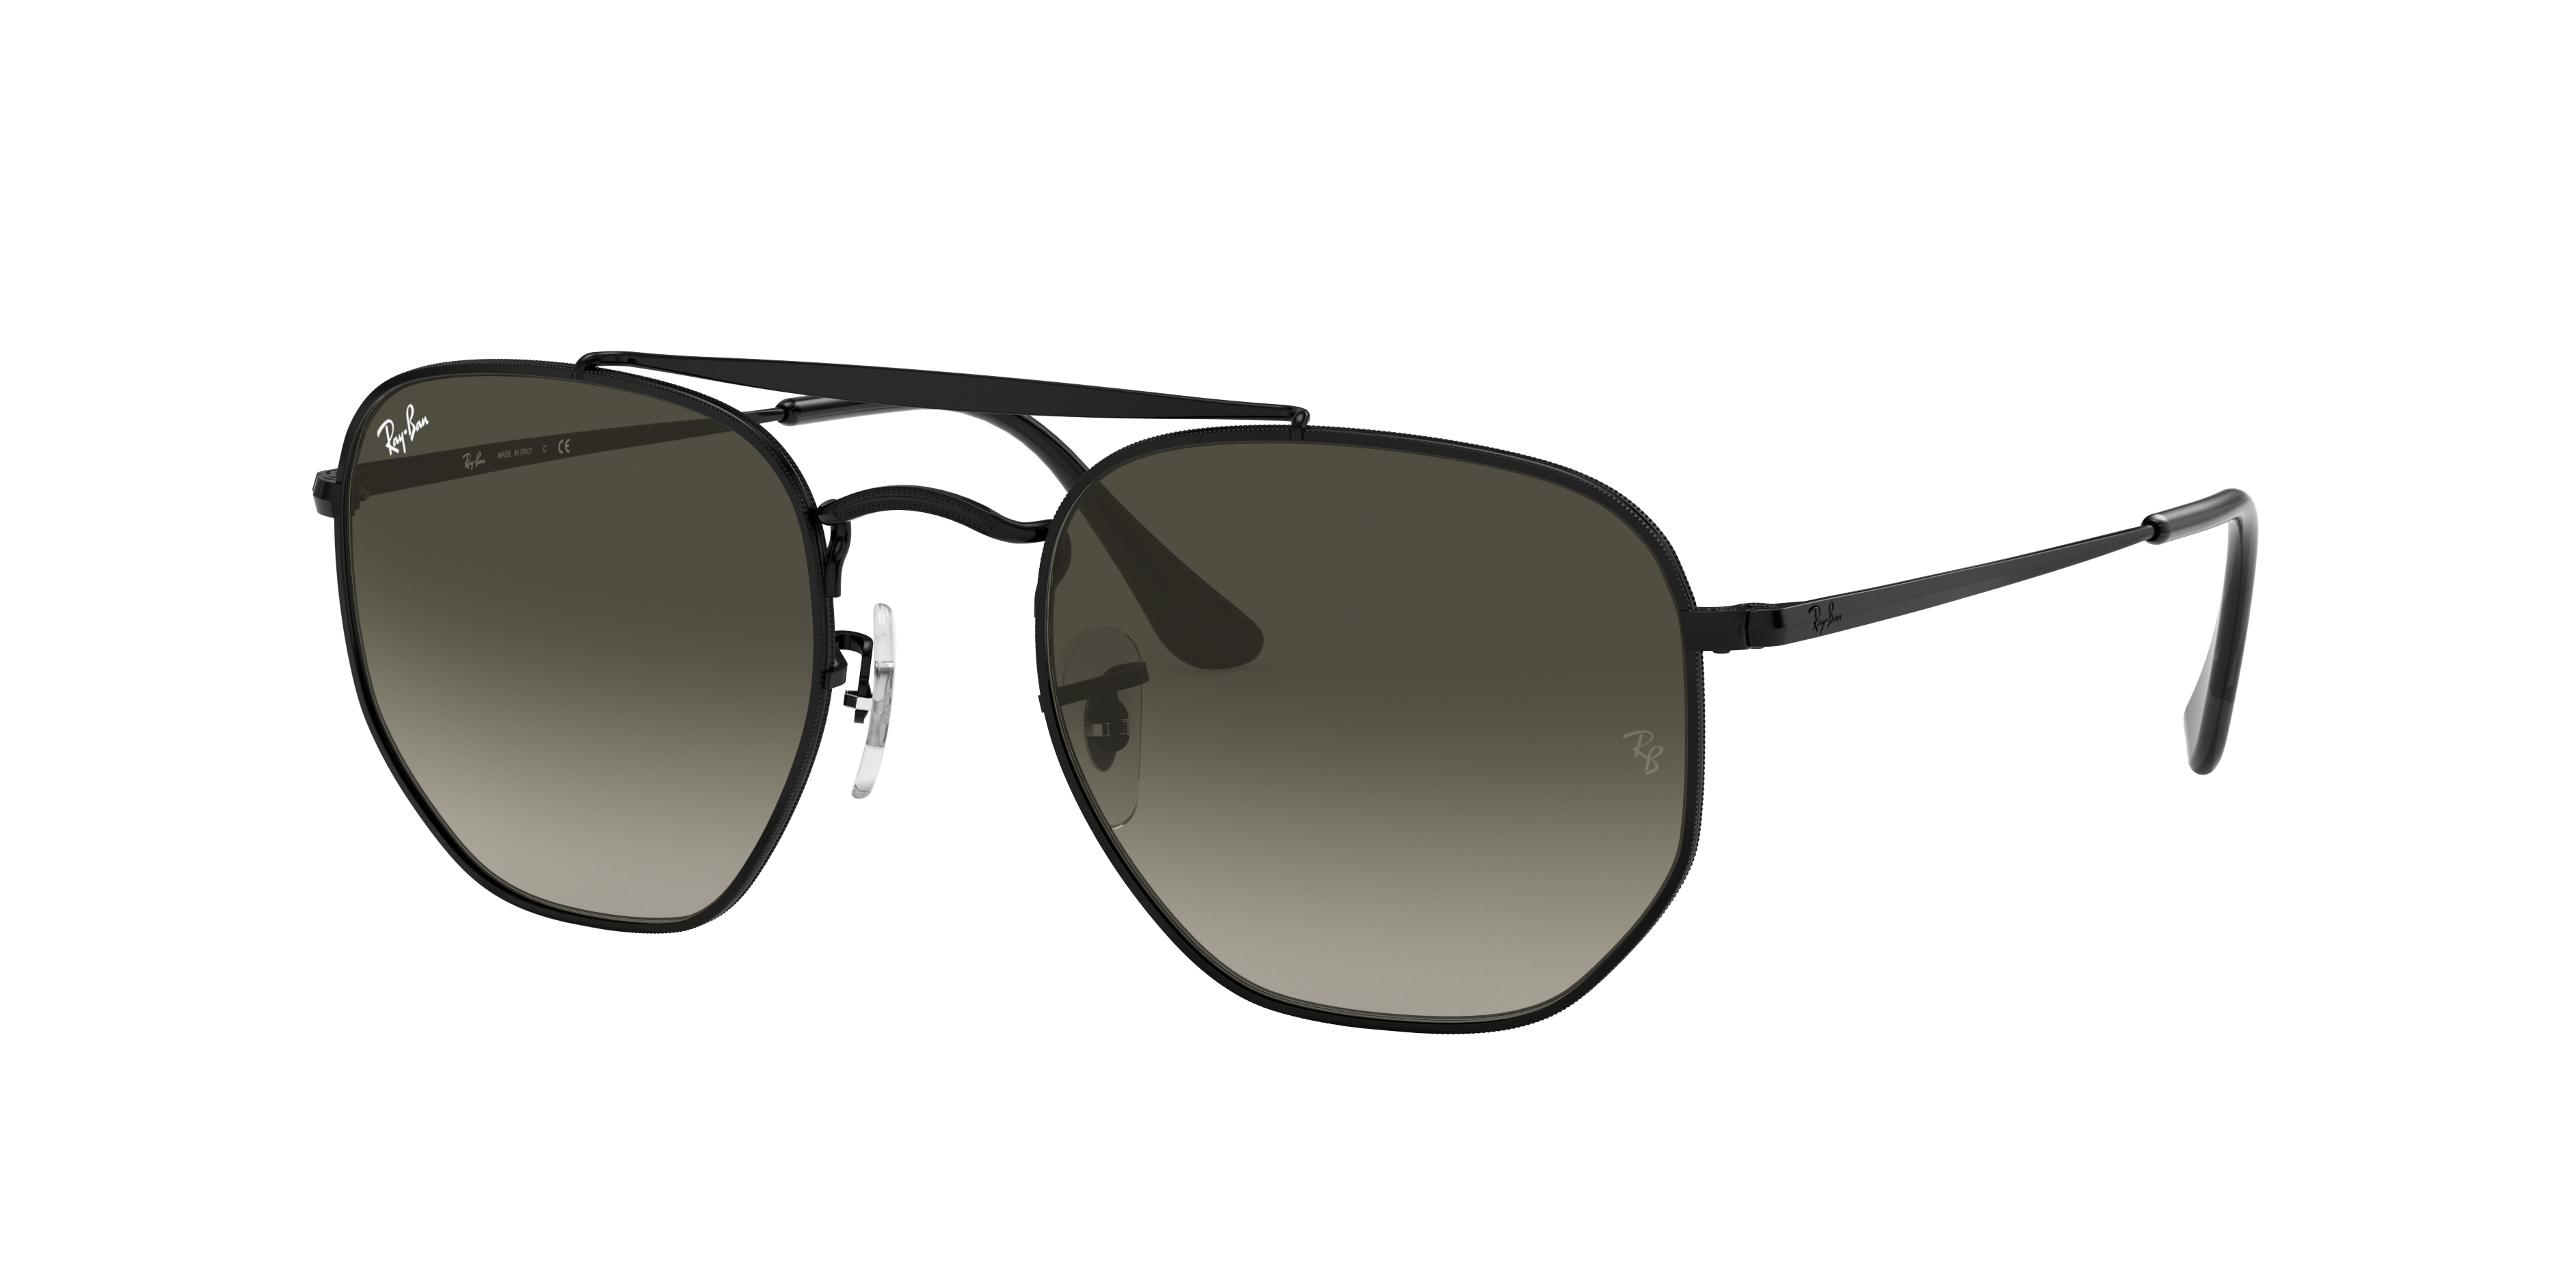 Marshal Sunglasses in Black and Grey | Ray-Ban®